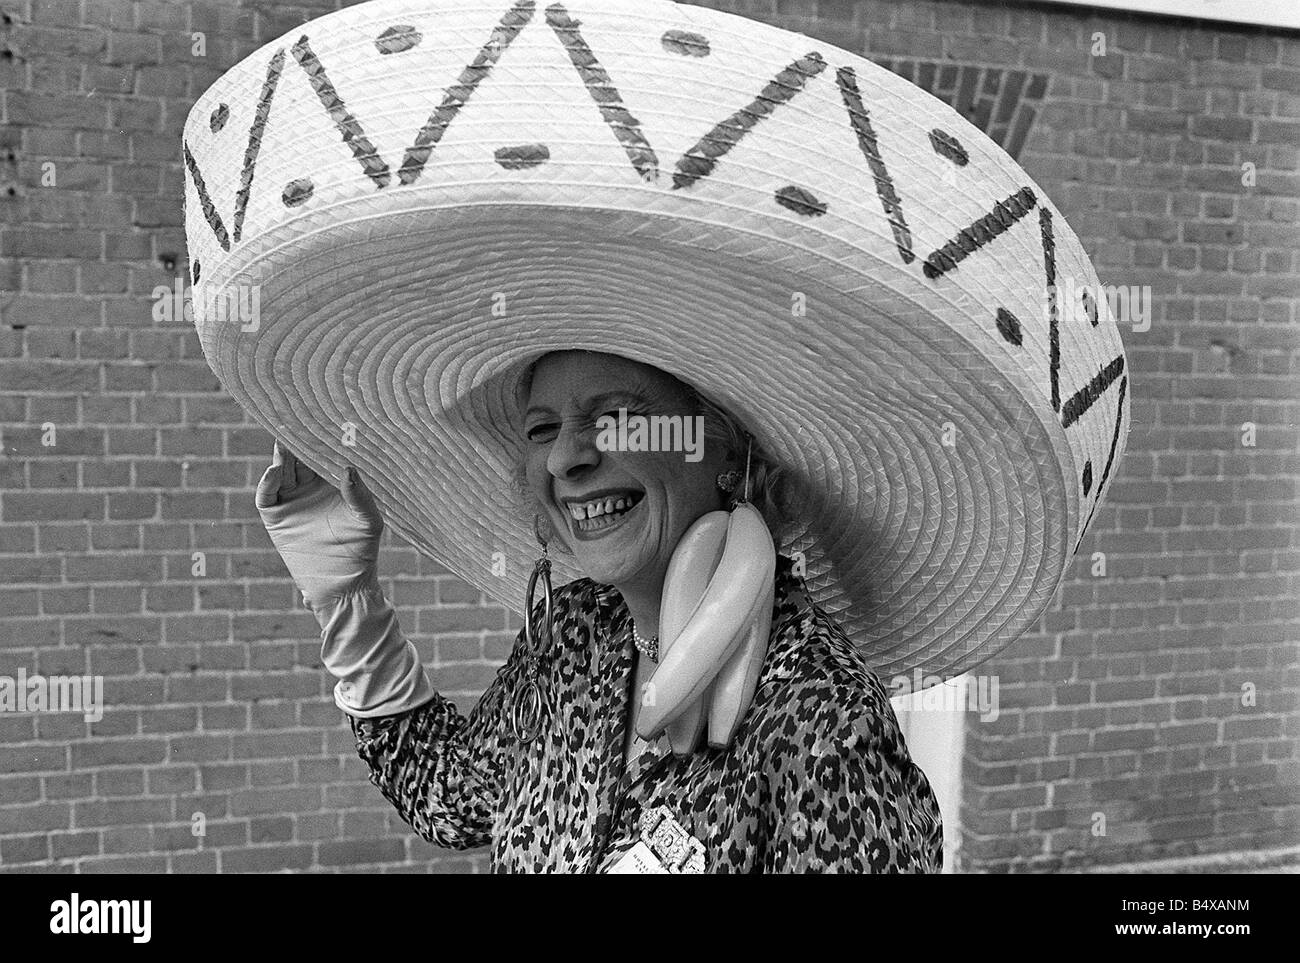 1968 Clothing Ascot Racing Fashion Gertrude Shilling wearing an outrageous Wide Brimmed Hat at Ascot race Stock Photo